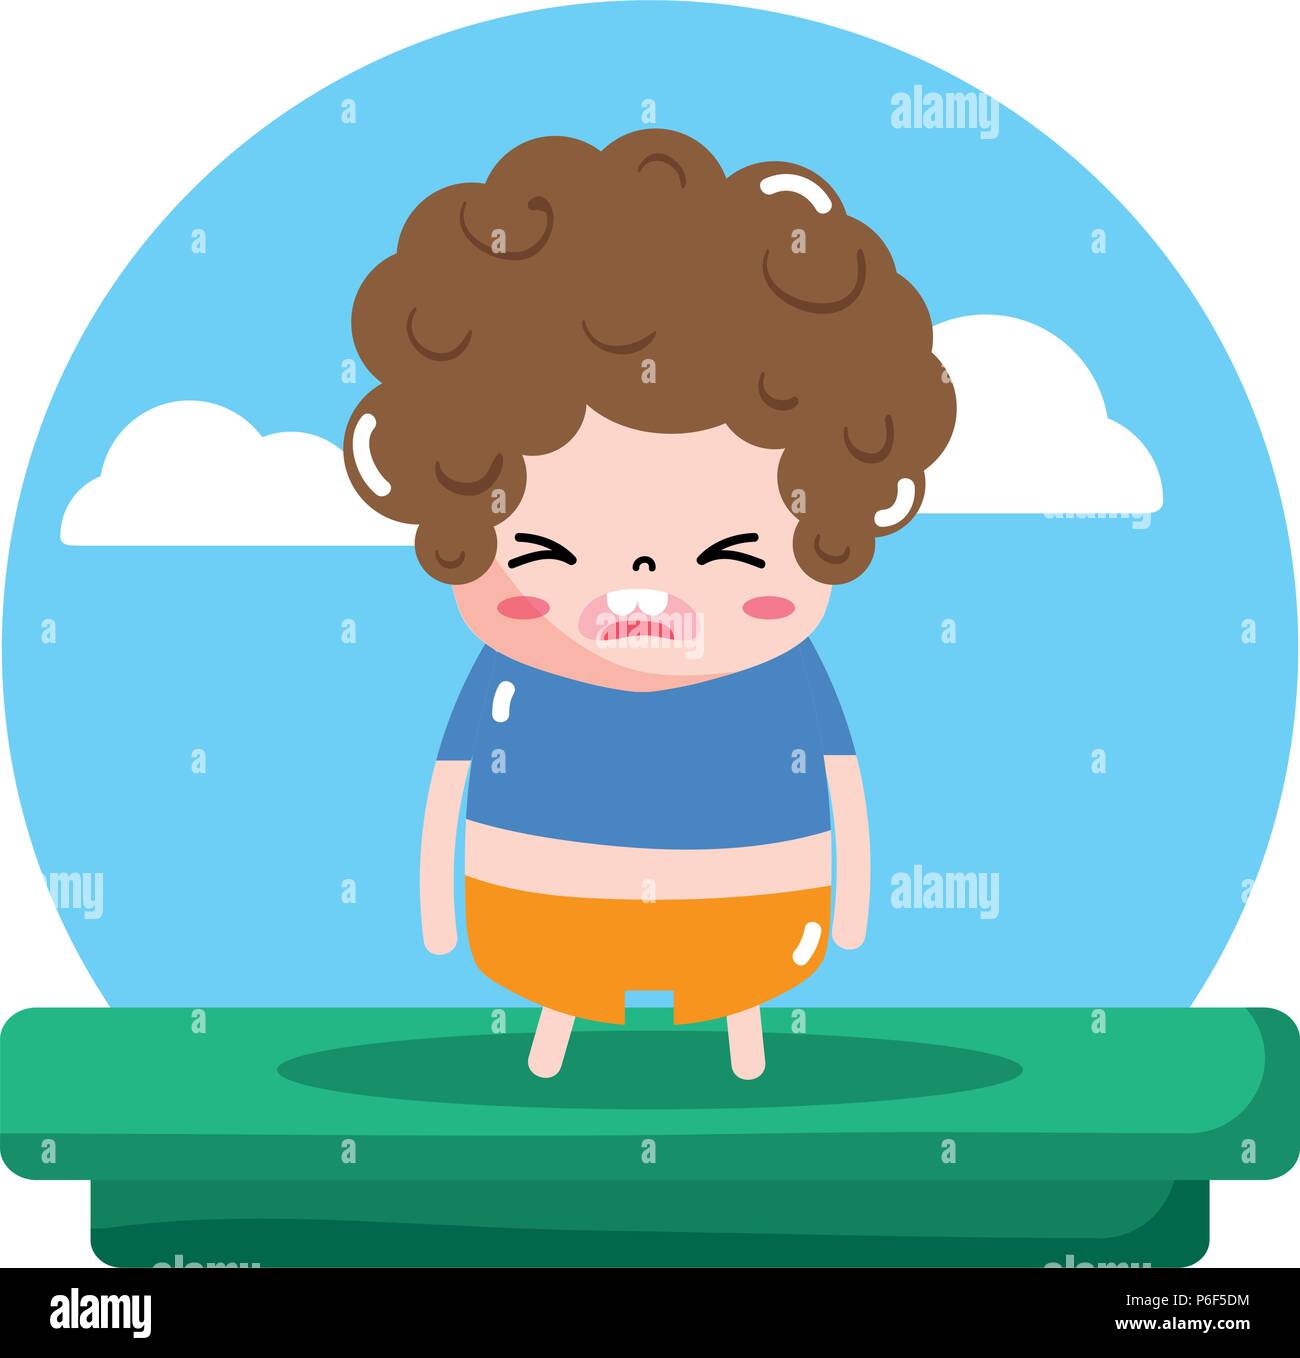 Embarrassed Stock Vector Images - Alamy